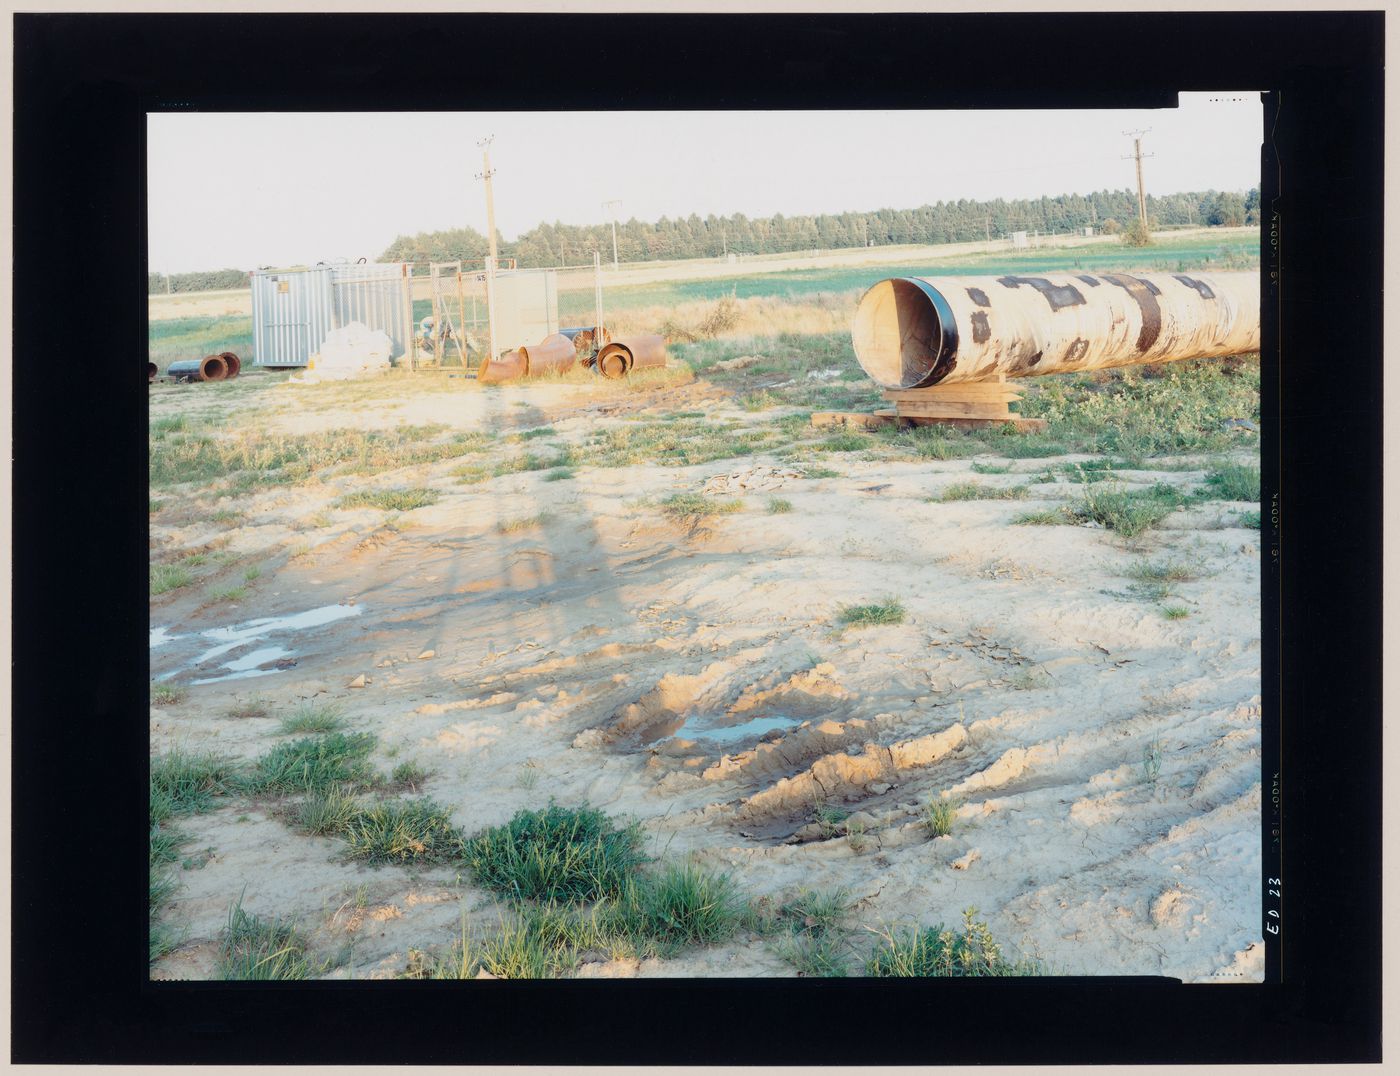 View of a main and other large pipes, a vacant lot and arable land, Jülich, Germany (from the series "In between cities")